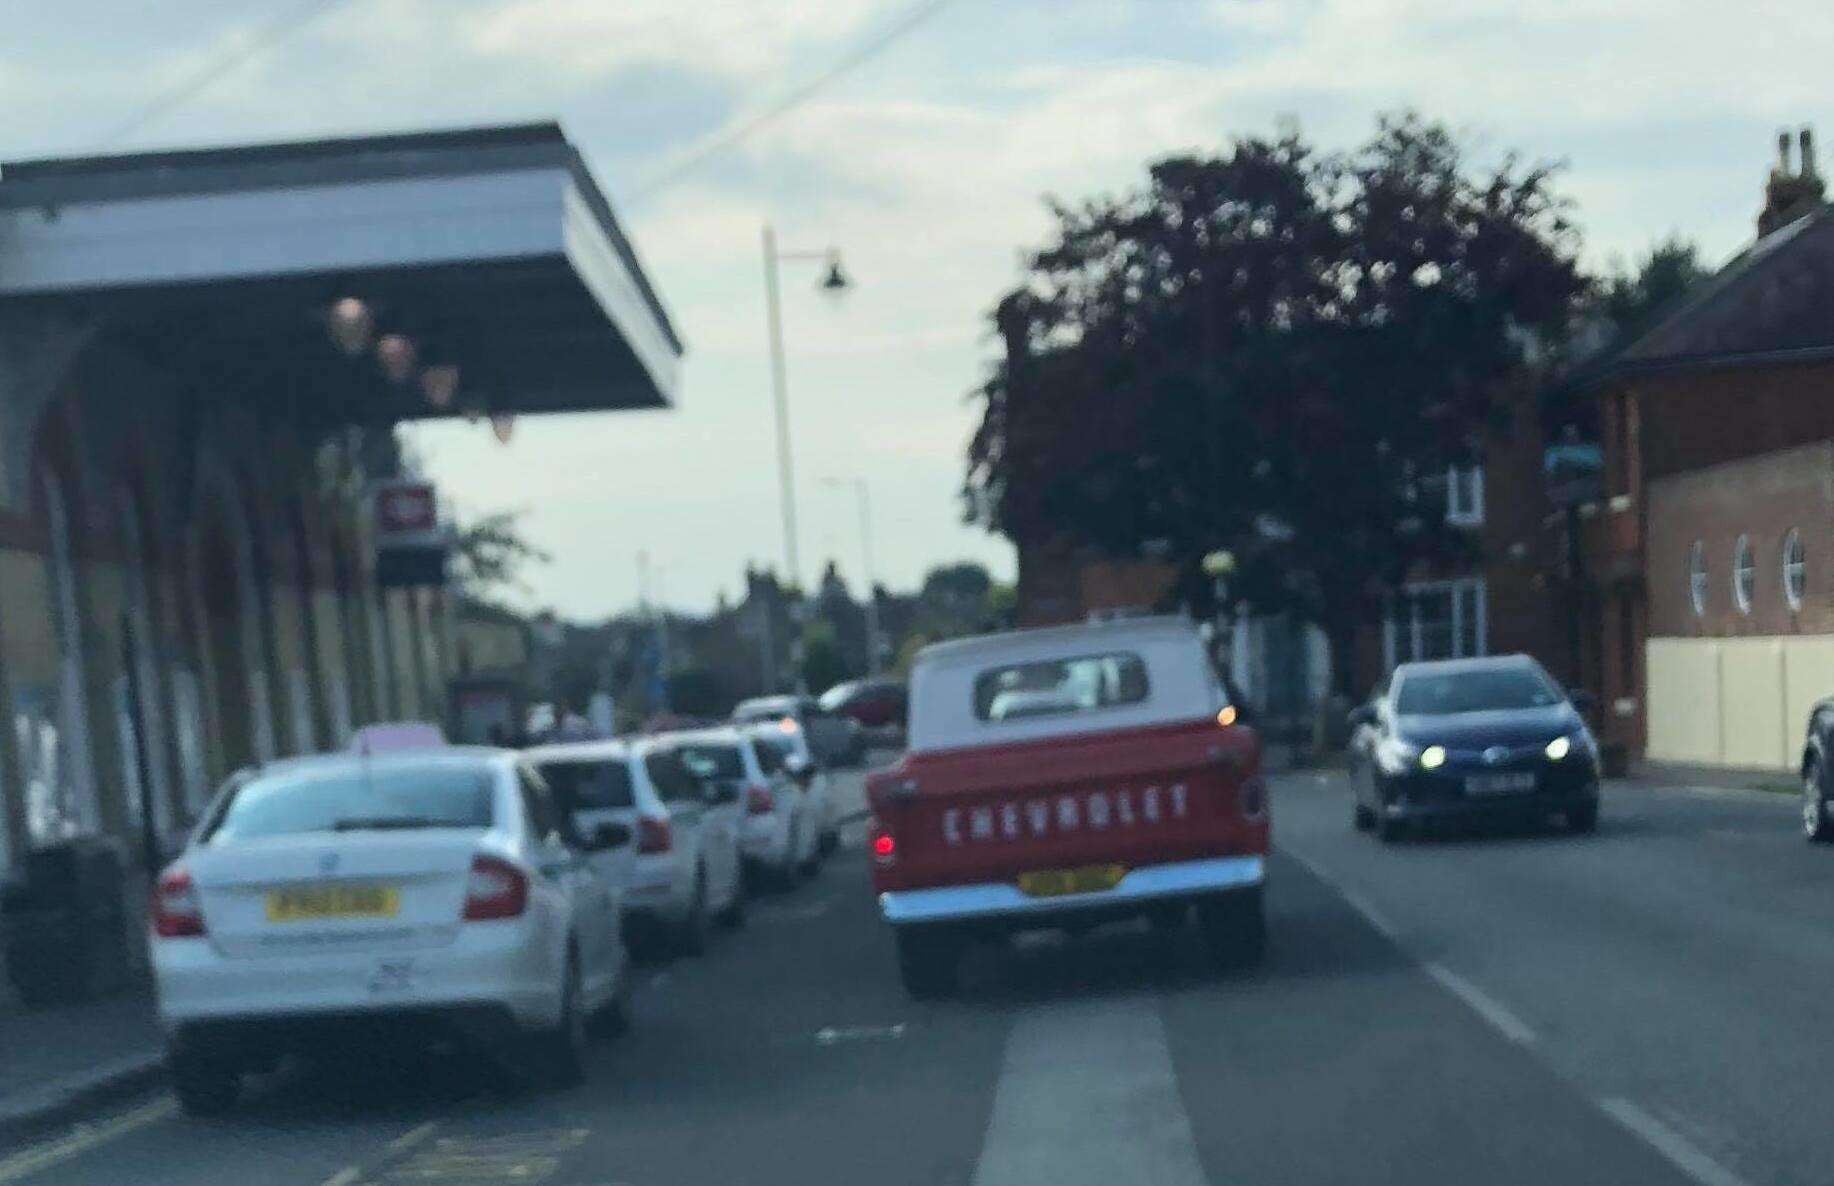 A red and white truck is reported to have been carelessly driving around Faversham (4031792)